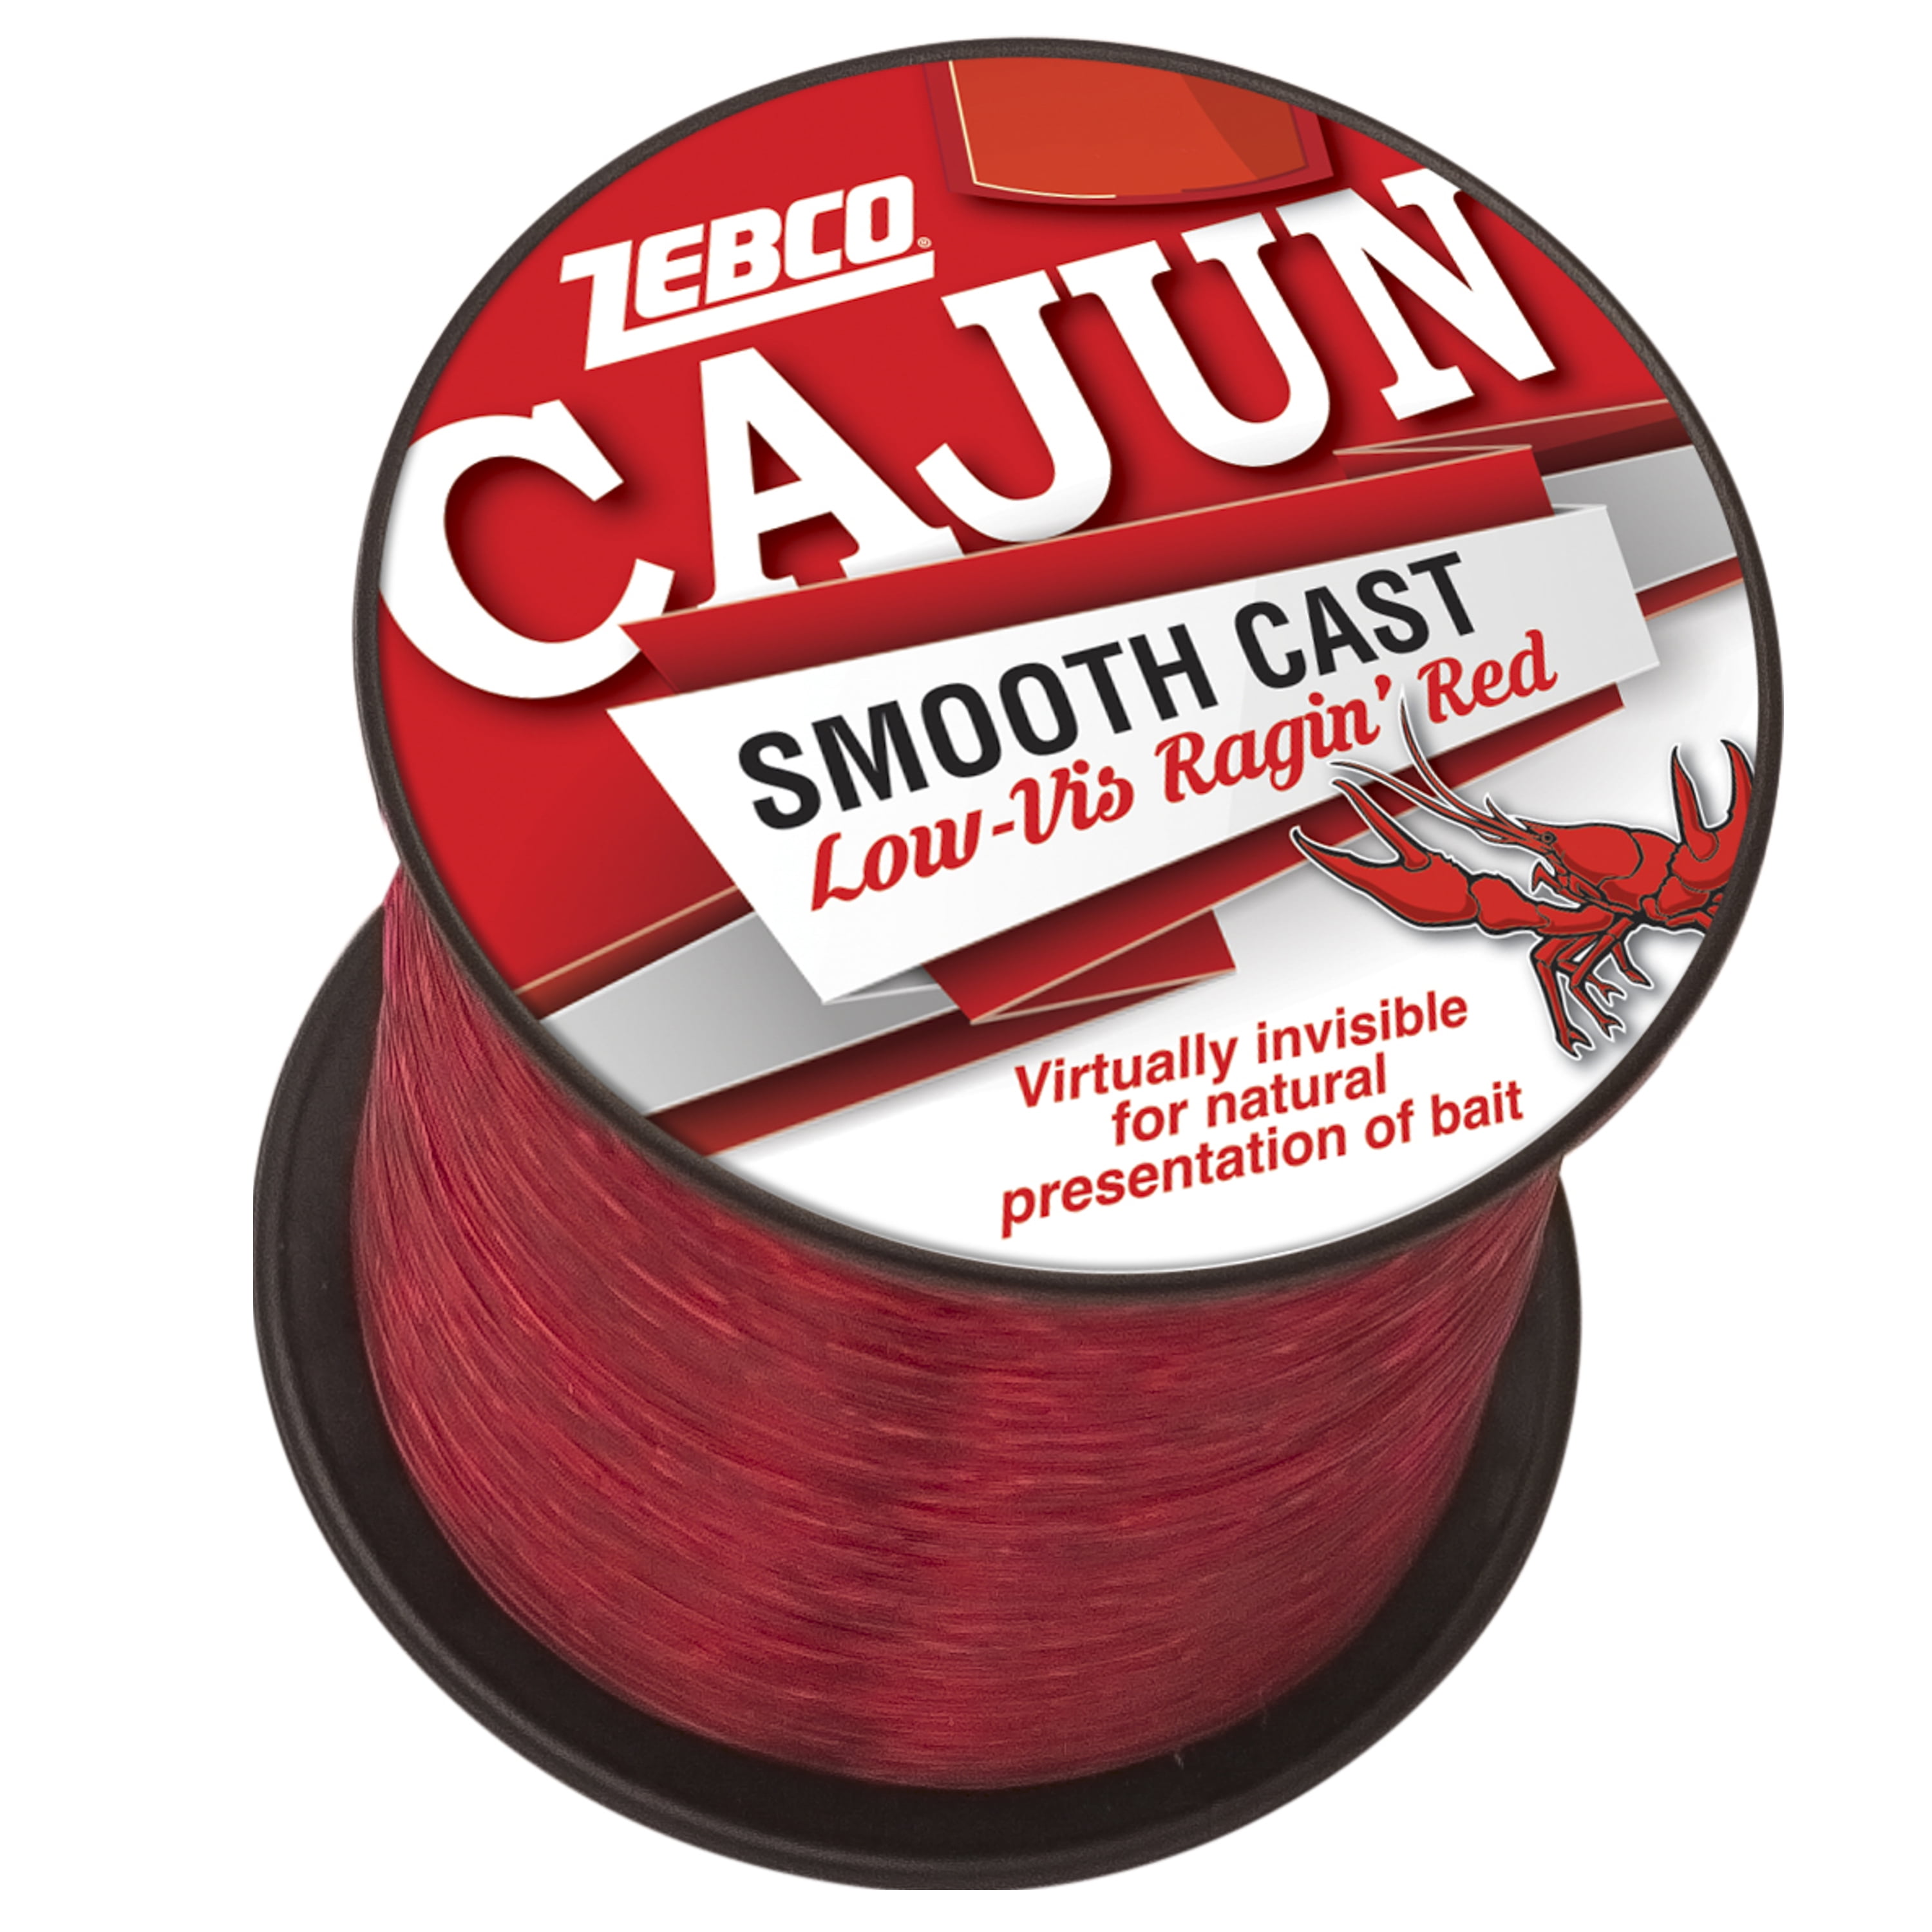 Cajun Clear Blue Bayou Fishing Line 6 LB Test 330 Yards Smooth Cast Low Memory 